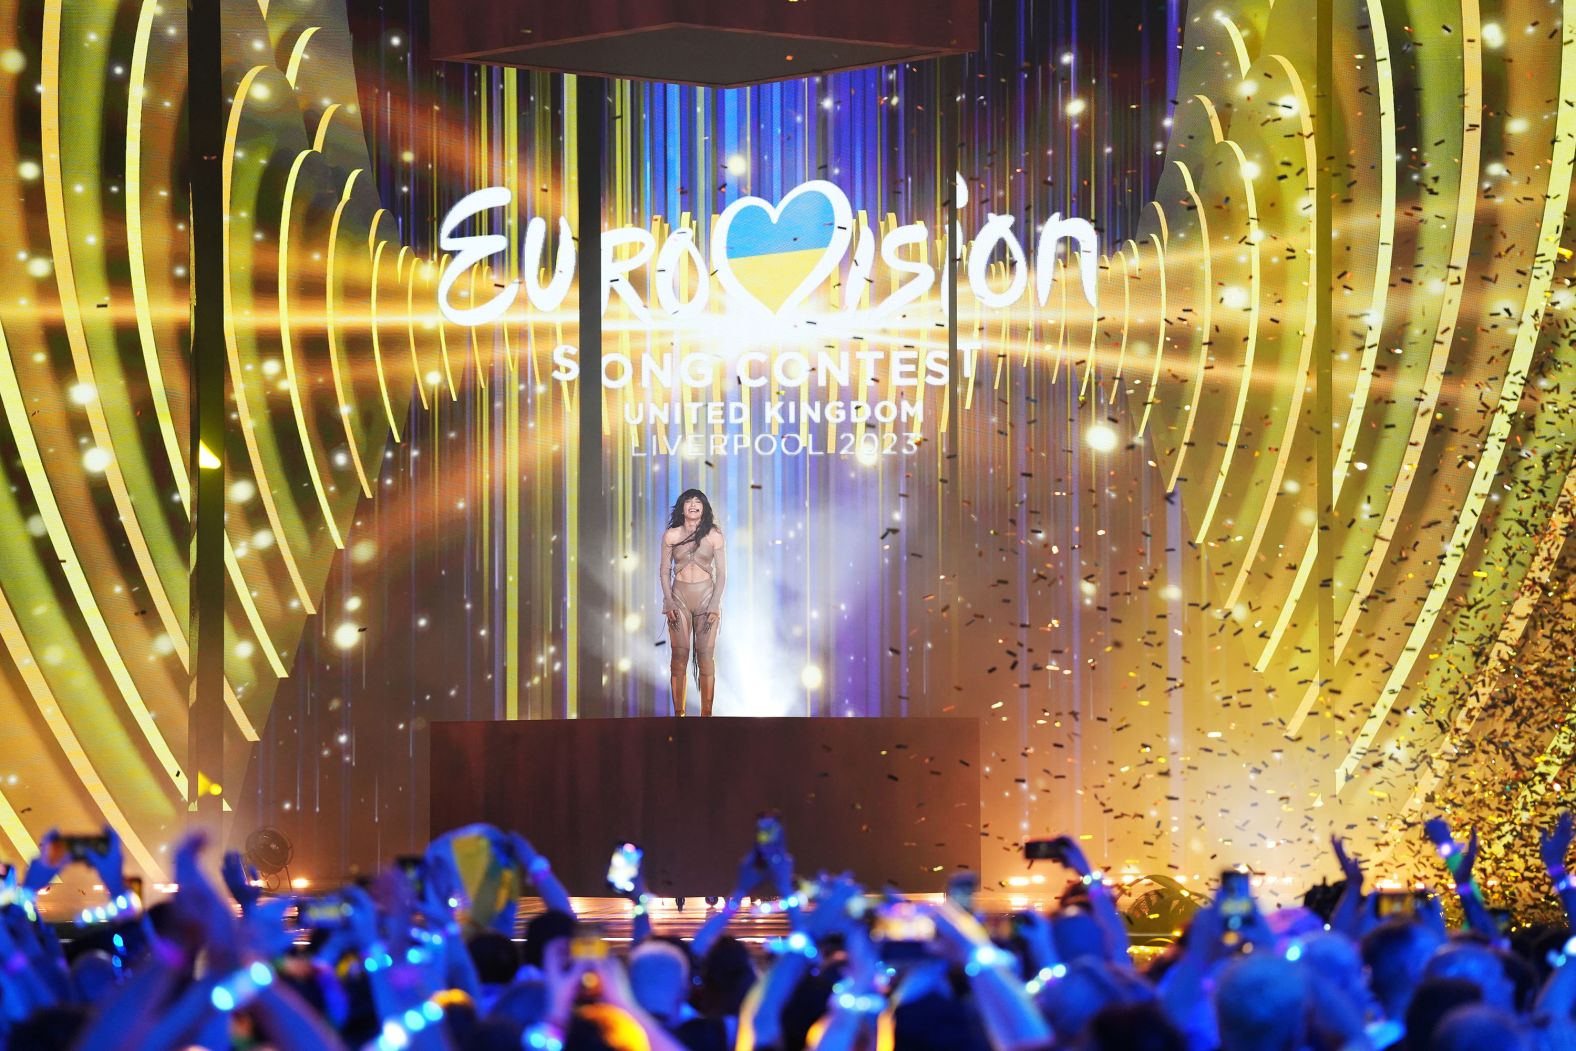 Sweden's Loreen performs on stage at the Eurovision Song Contest, <a href="index.php?page=&url=https%3A%2F%2Fwww.cnn.com%2F2023%2F05%2F13%2Feurope%2Feurovision-song-contest-2023-winner-intl%2Findex.html" target="_blank">which she won</a> on Saturday, May 13. She became just the second performer to win the competition more than once, clinching victory with the pop ballad "Tattoo."